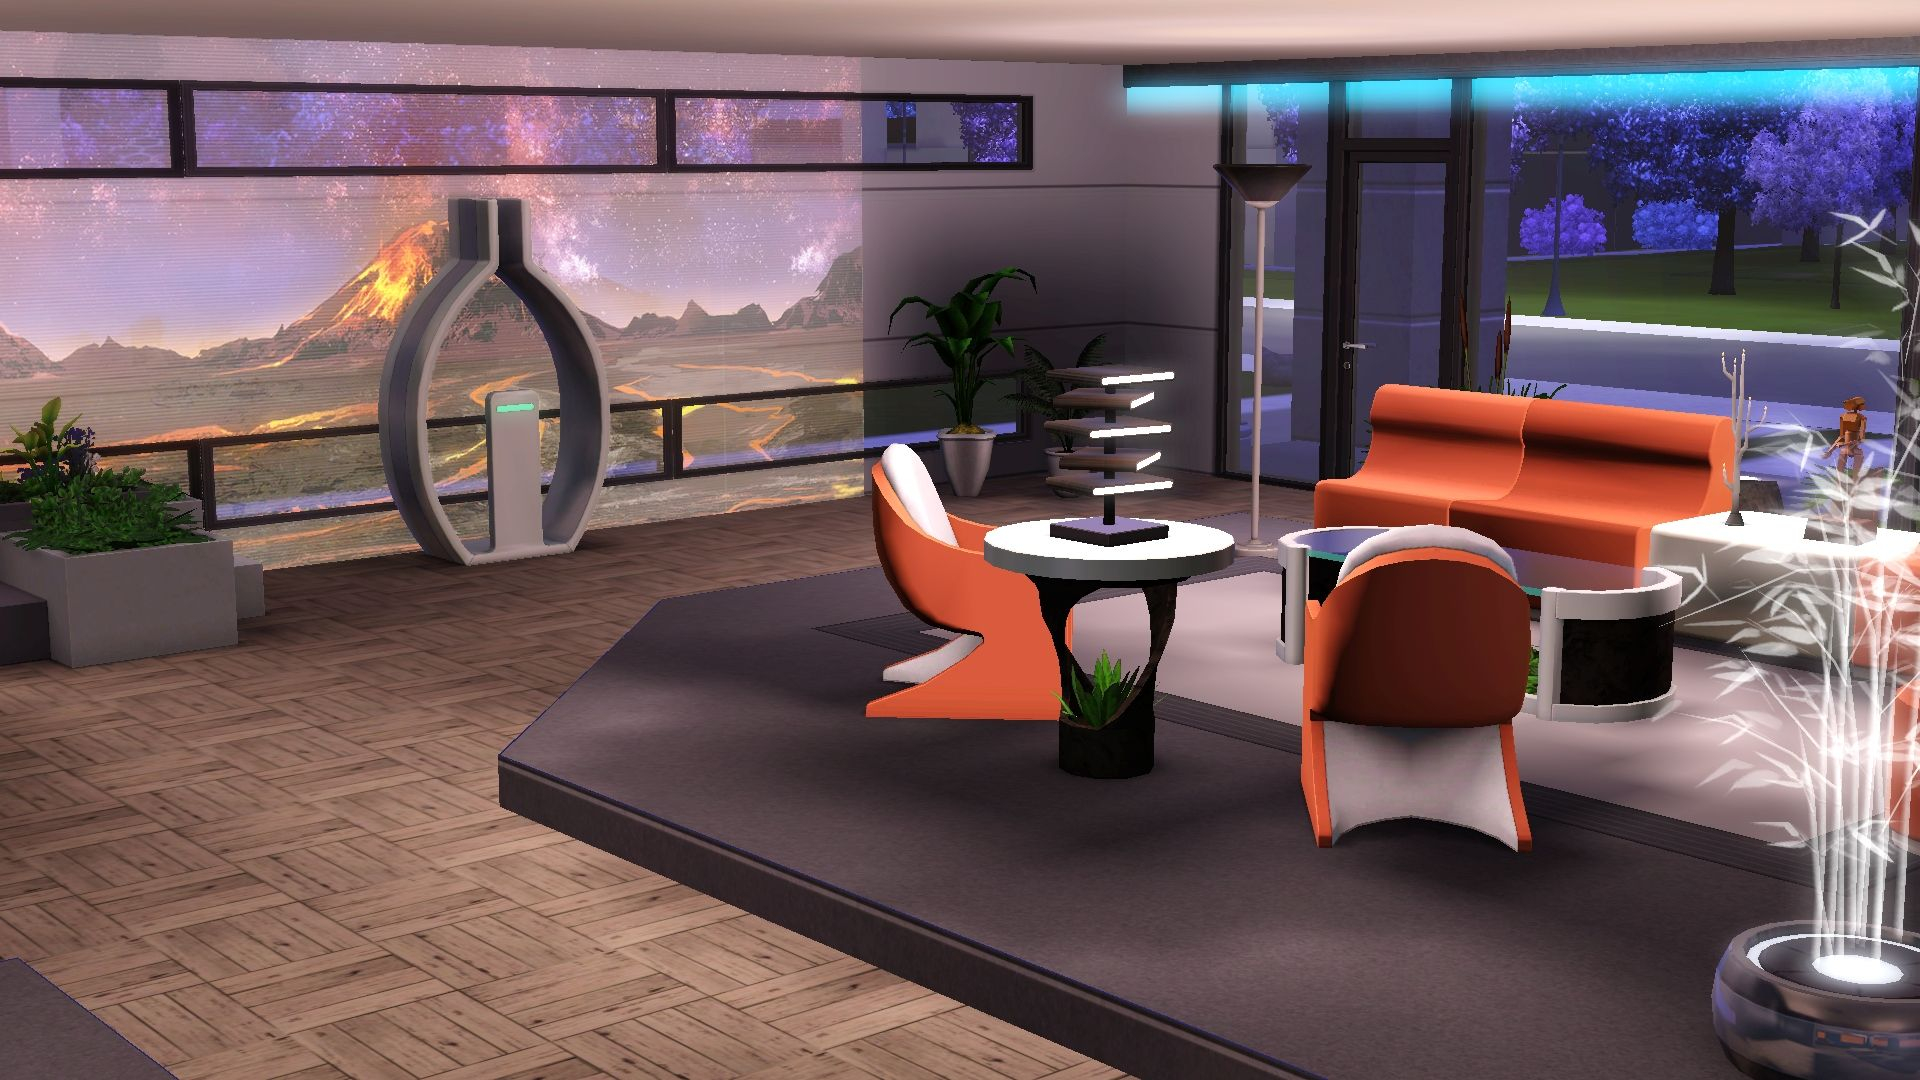 1920x1080 Love the new digital walls / The Sims 3 Into the Future | Around the sims 4, Sims 3, Sims